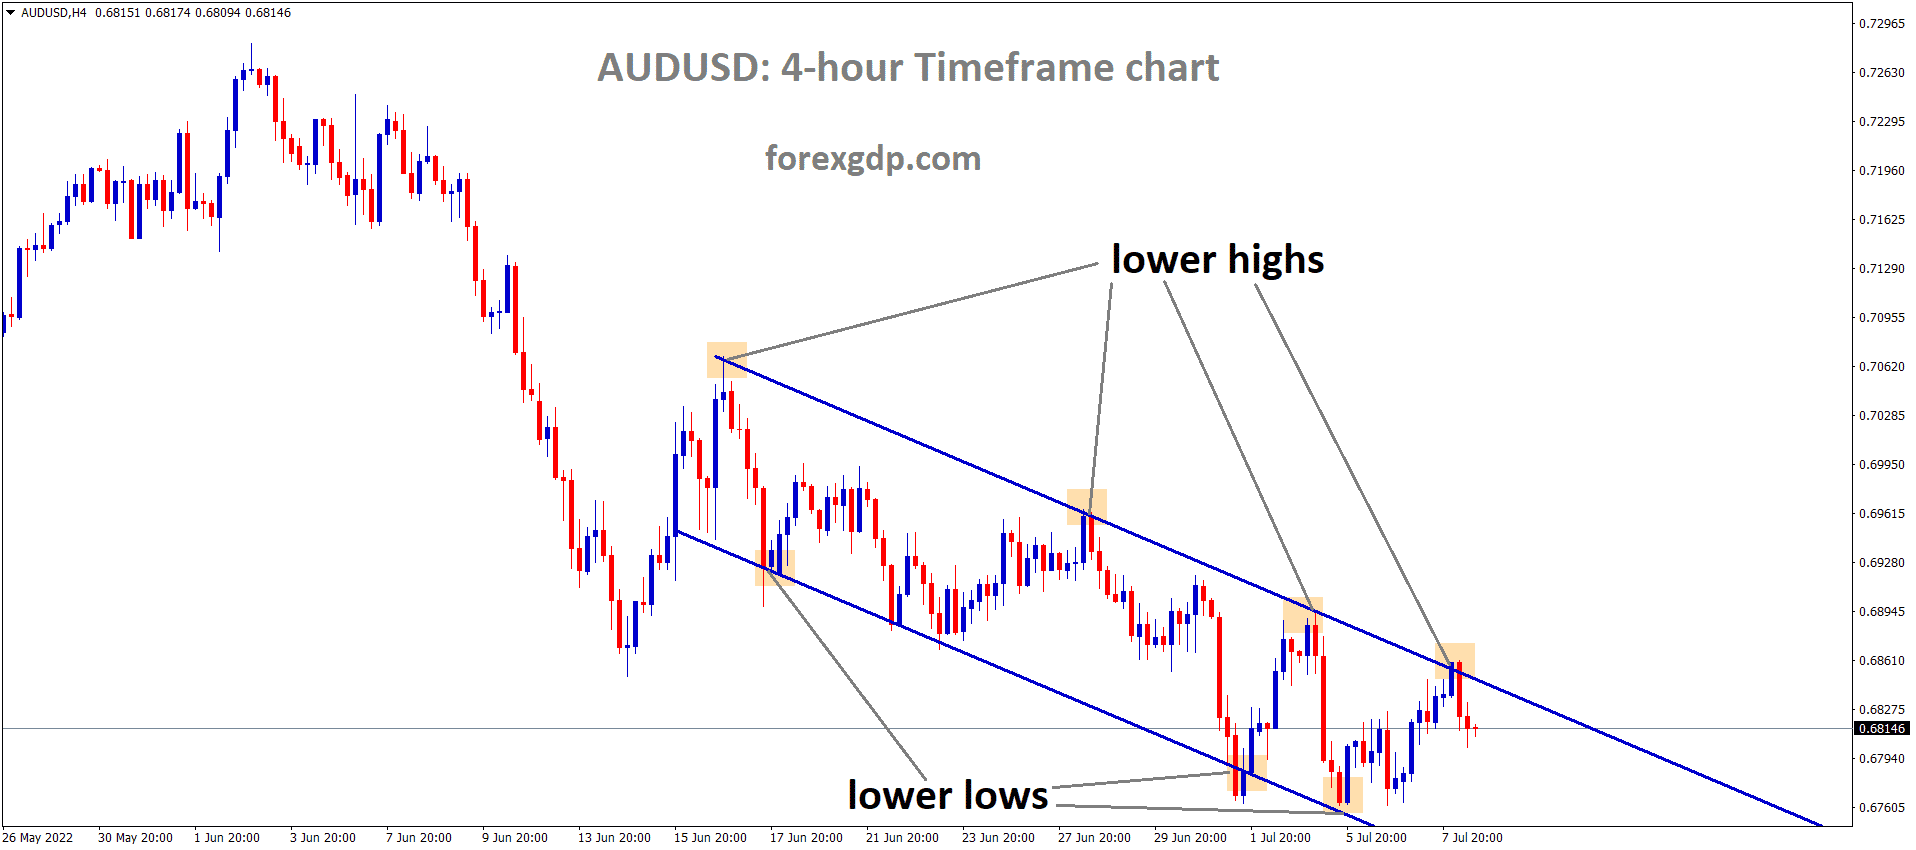 AUDUSD is moving in the Descending channel and the Market has sfallen from the Lower high area of the channel 1